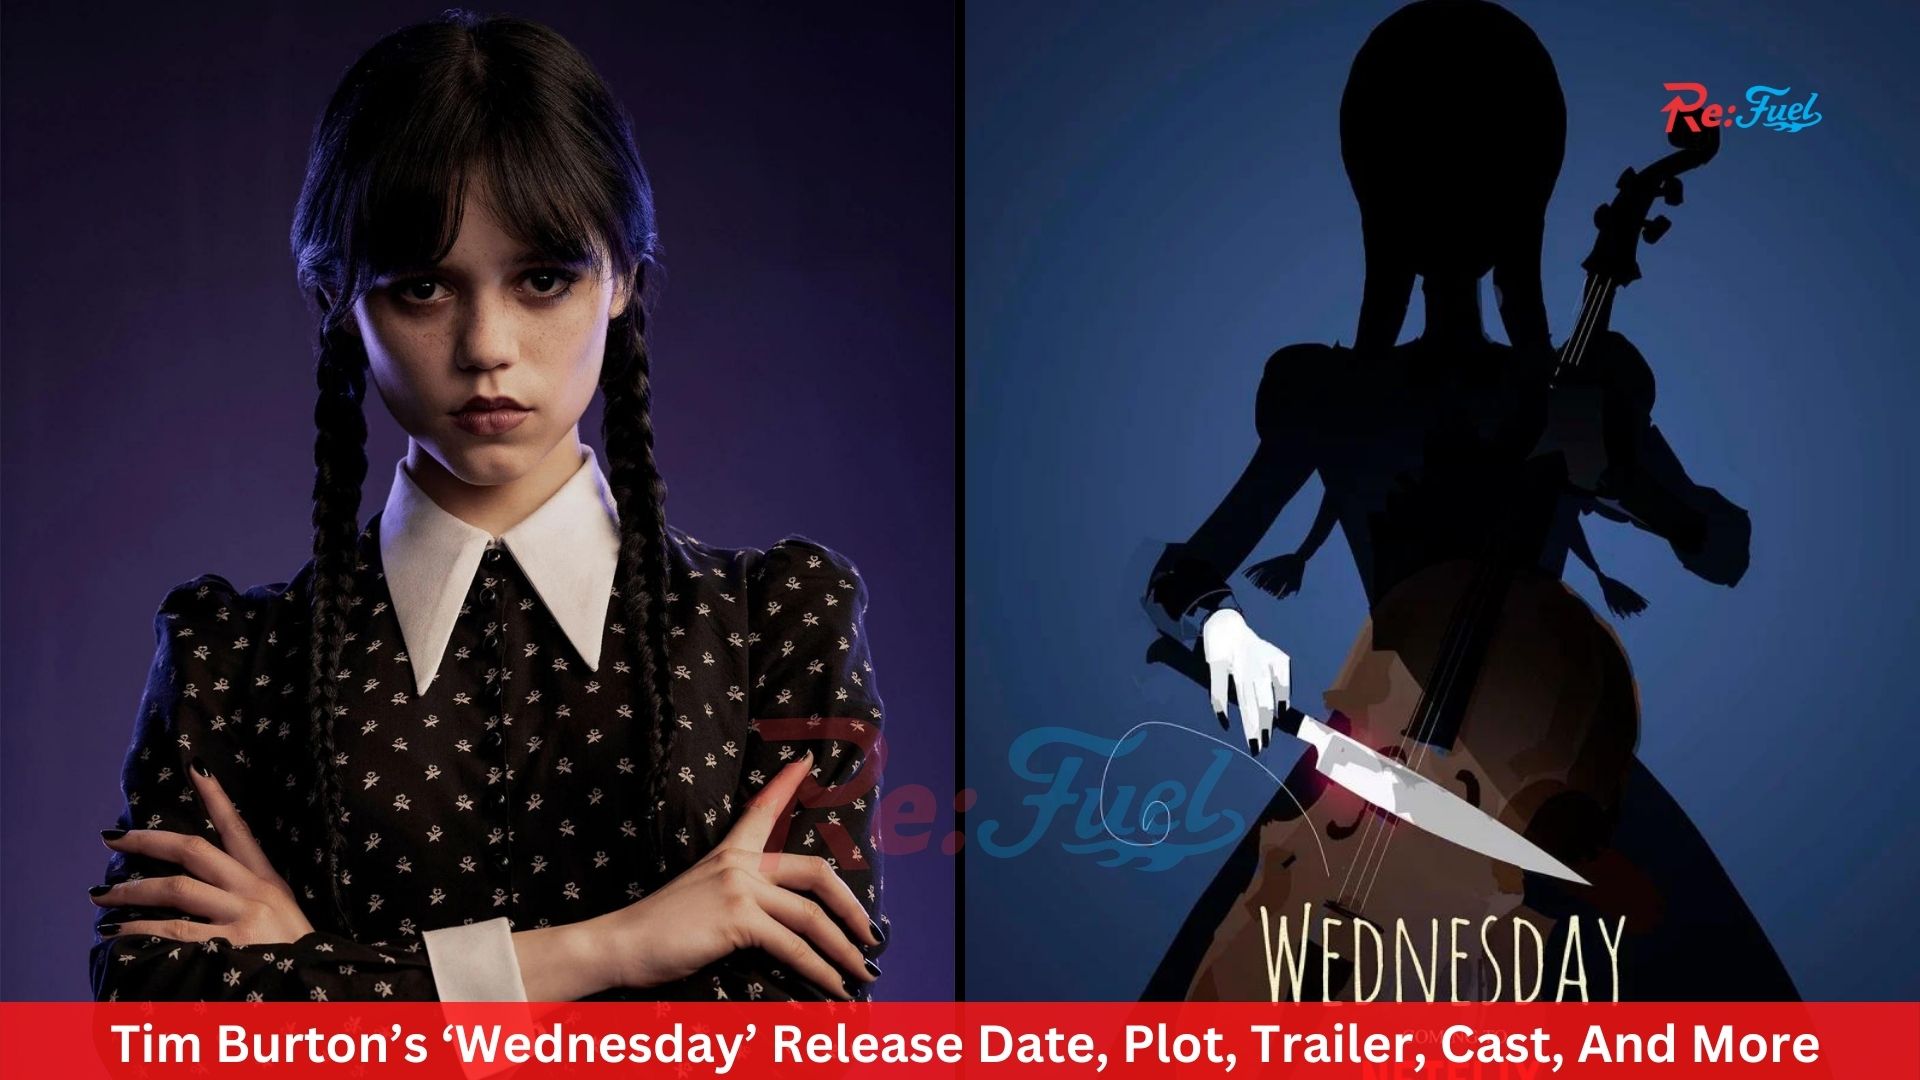 Tim Burton’s ‘Wednesday’ Release Date, Plot, Trailer, Cast, And More